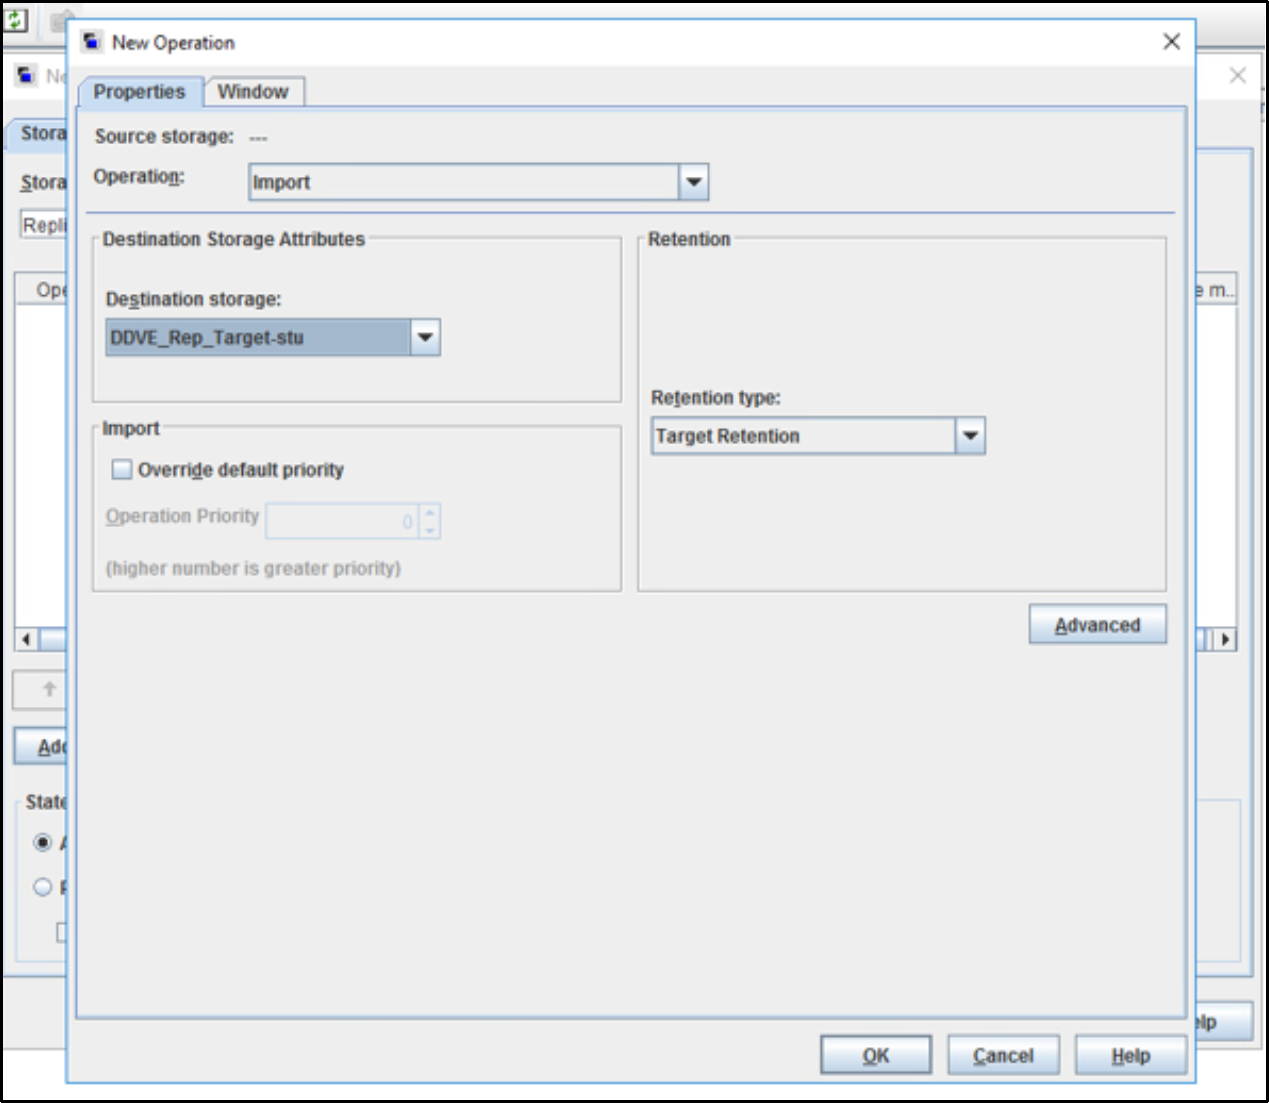 The image shows the option to create an SLP with Import operation using the NetBackup Storage Unit 